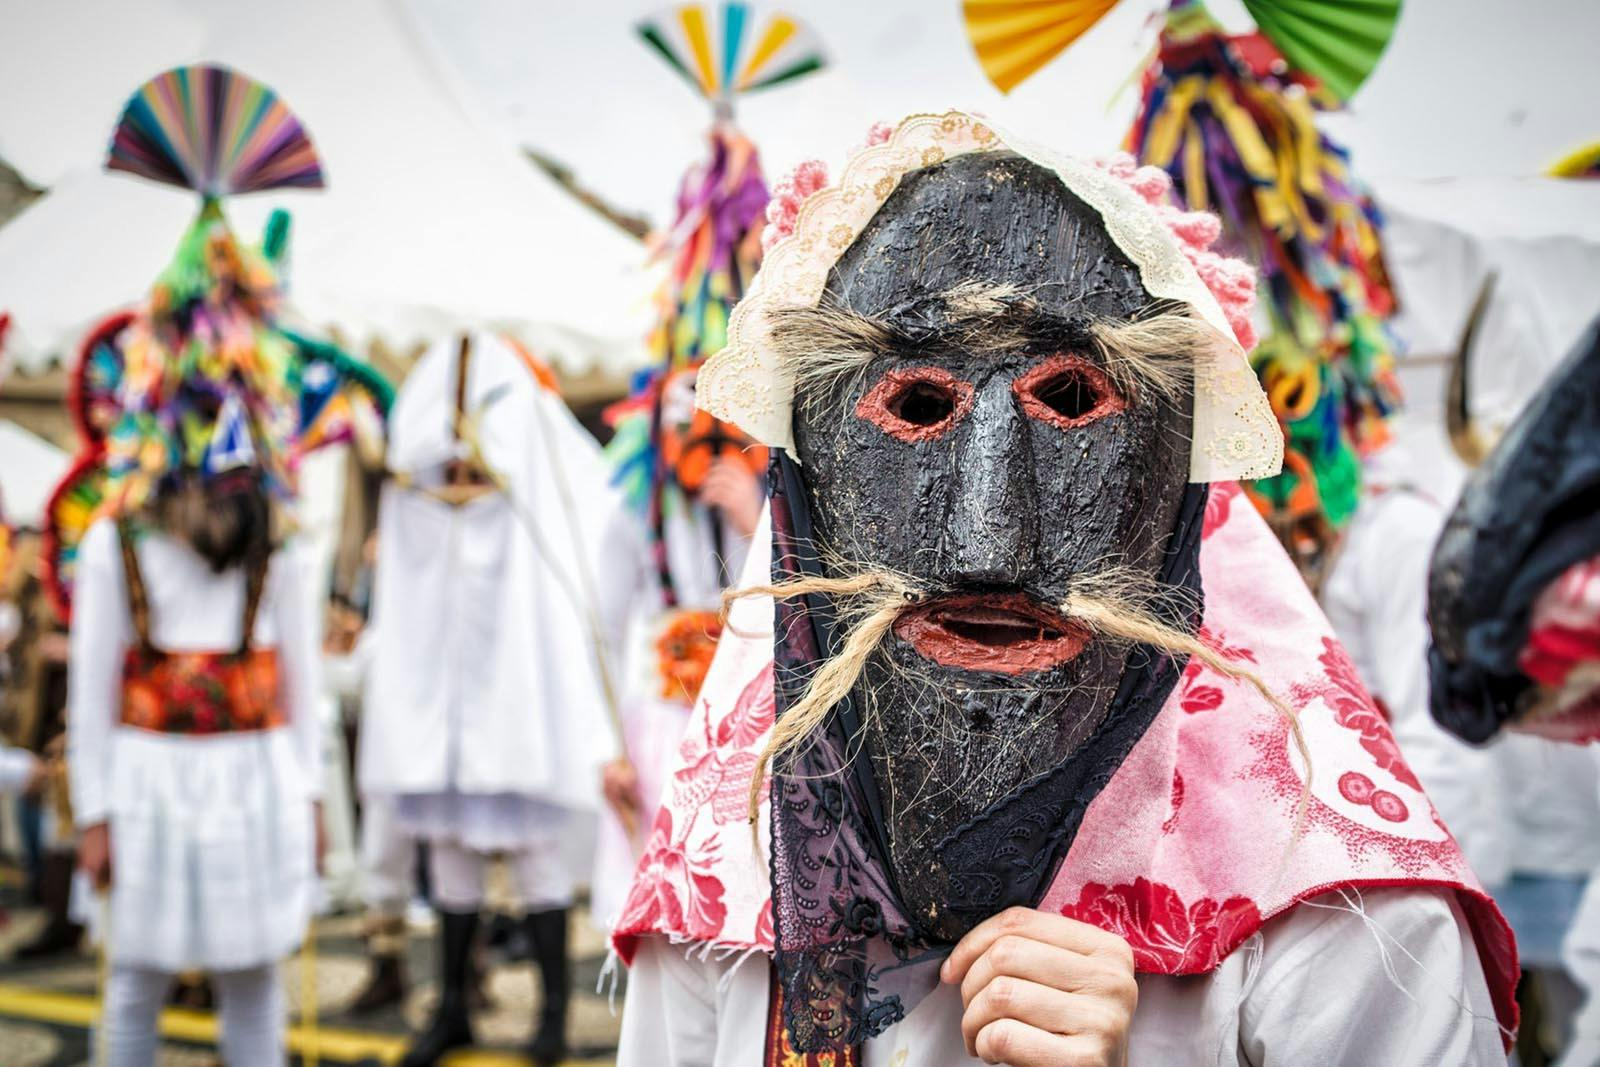 Masked entertainer at one of the top Portuguese events, the Festival of the Iberian Mask in Lisbon.